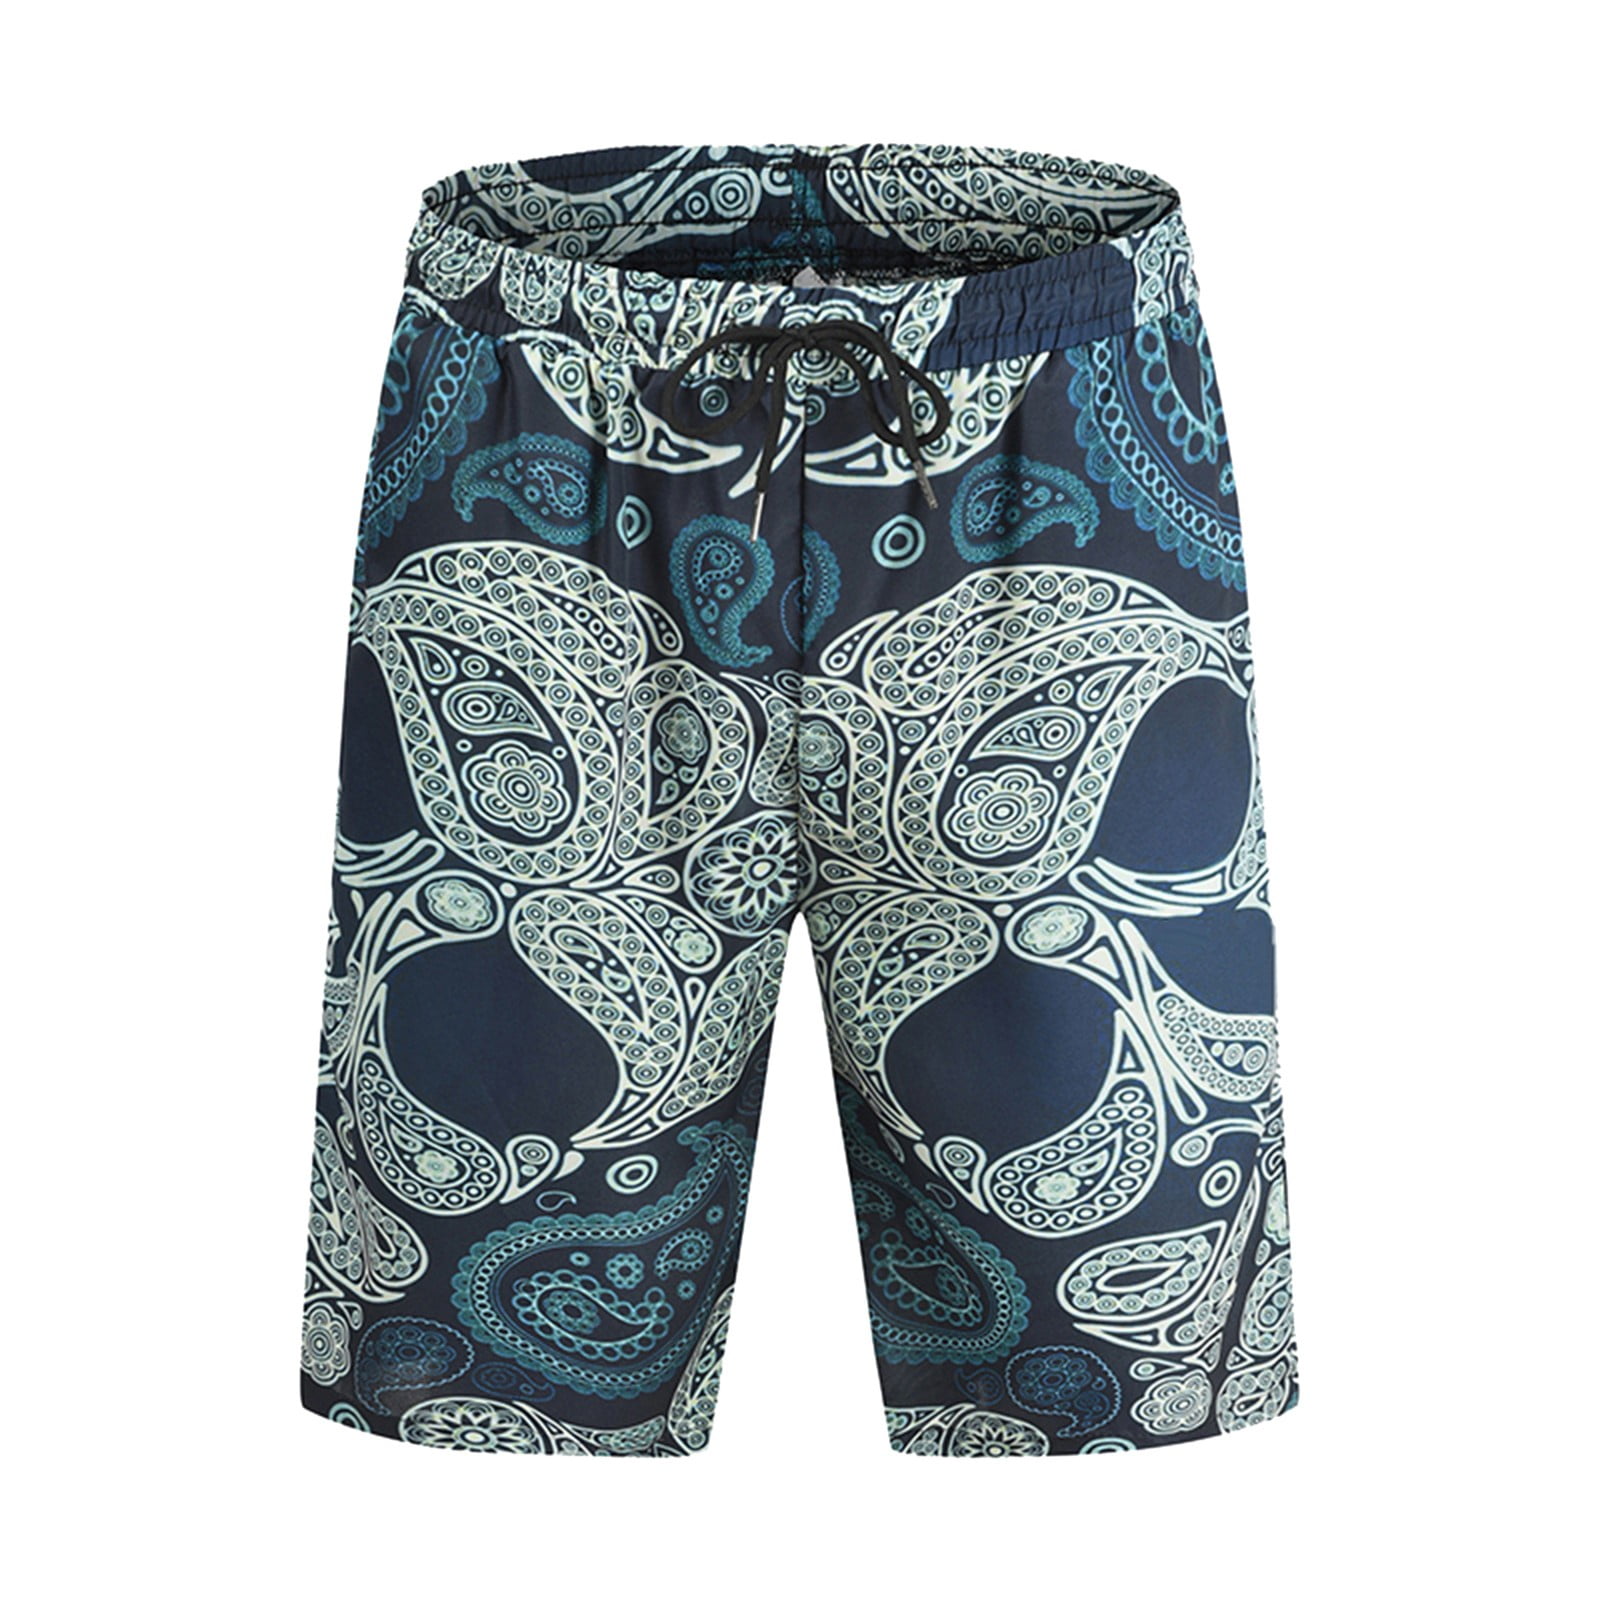 KUWT Mens Swim Trunks Day of The Dead Skull Octopus Quick Dry Beach Shorts Summer Surf Board Shorts 